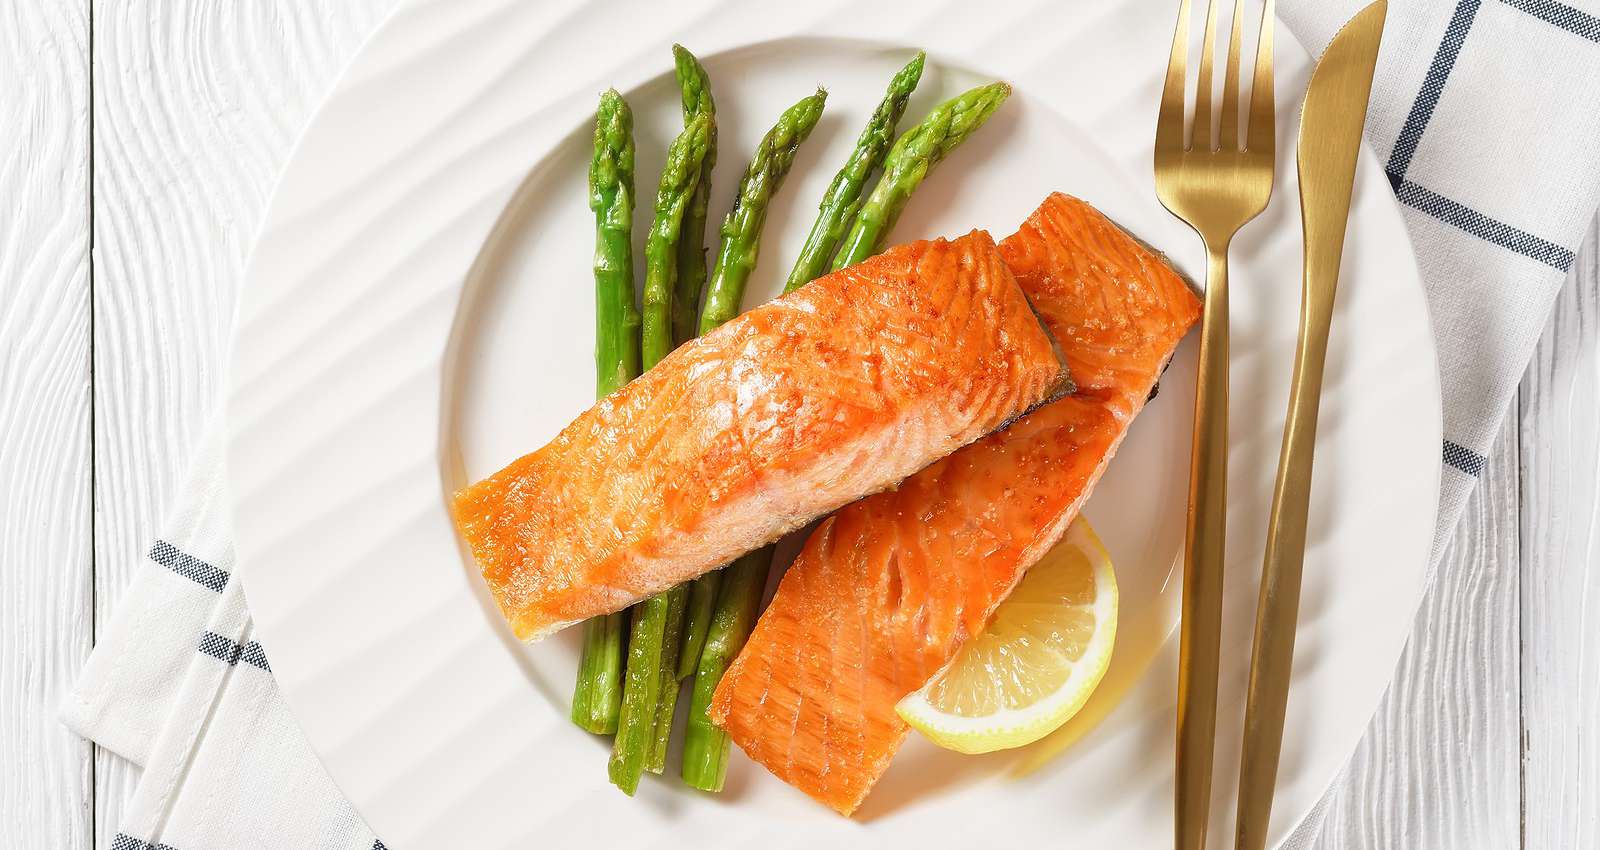 Mustard Crusted Salmon with Roasted Asparagus